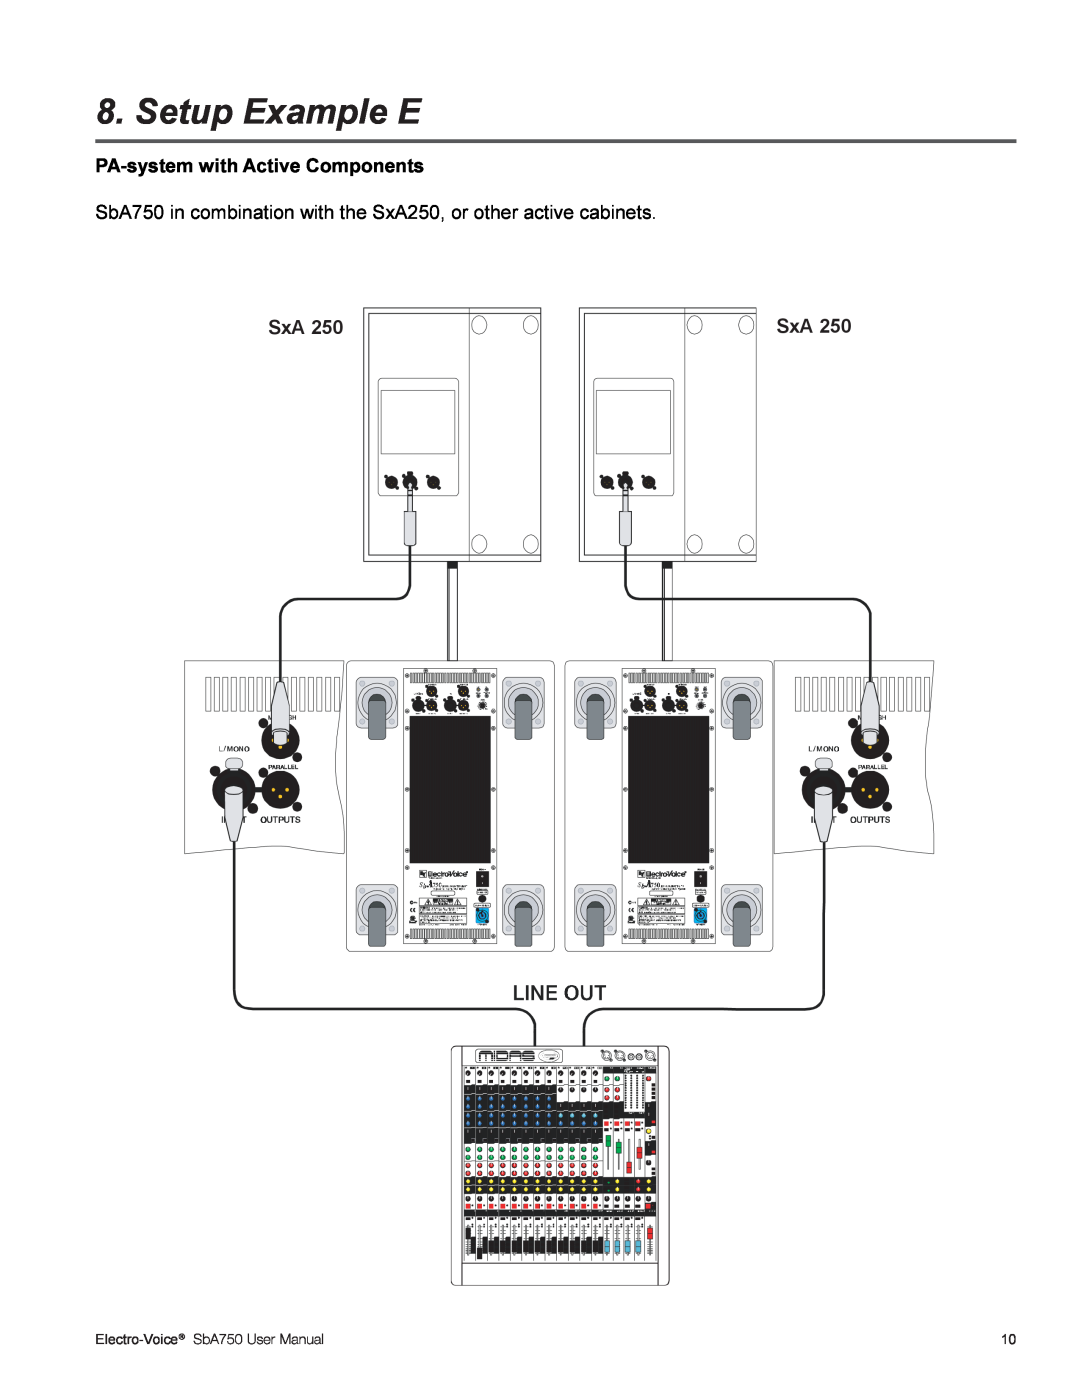 Electro-Voice SBA750 user manual Electro-Voice, Setup Example E, PA-systemwith Active Components 